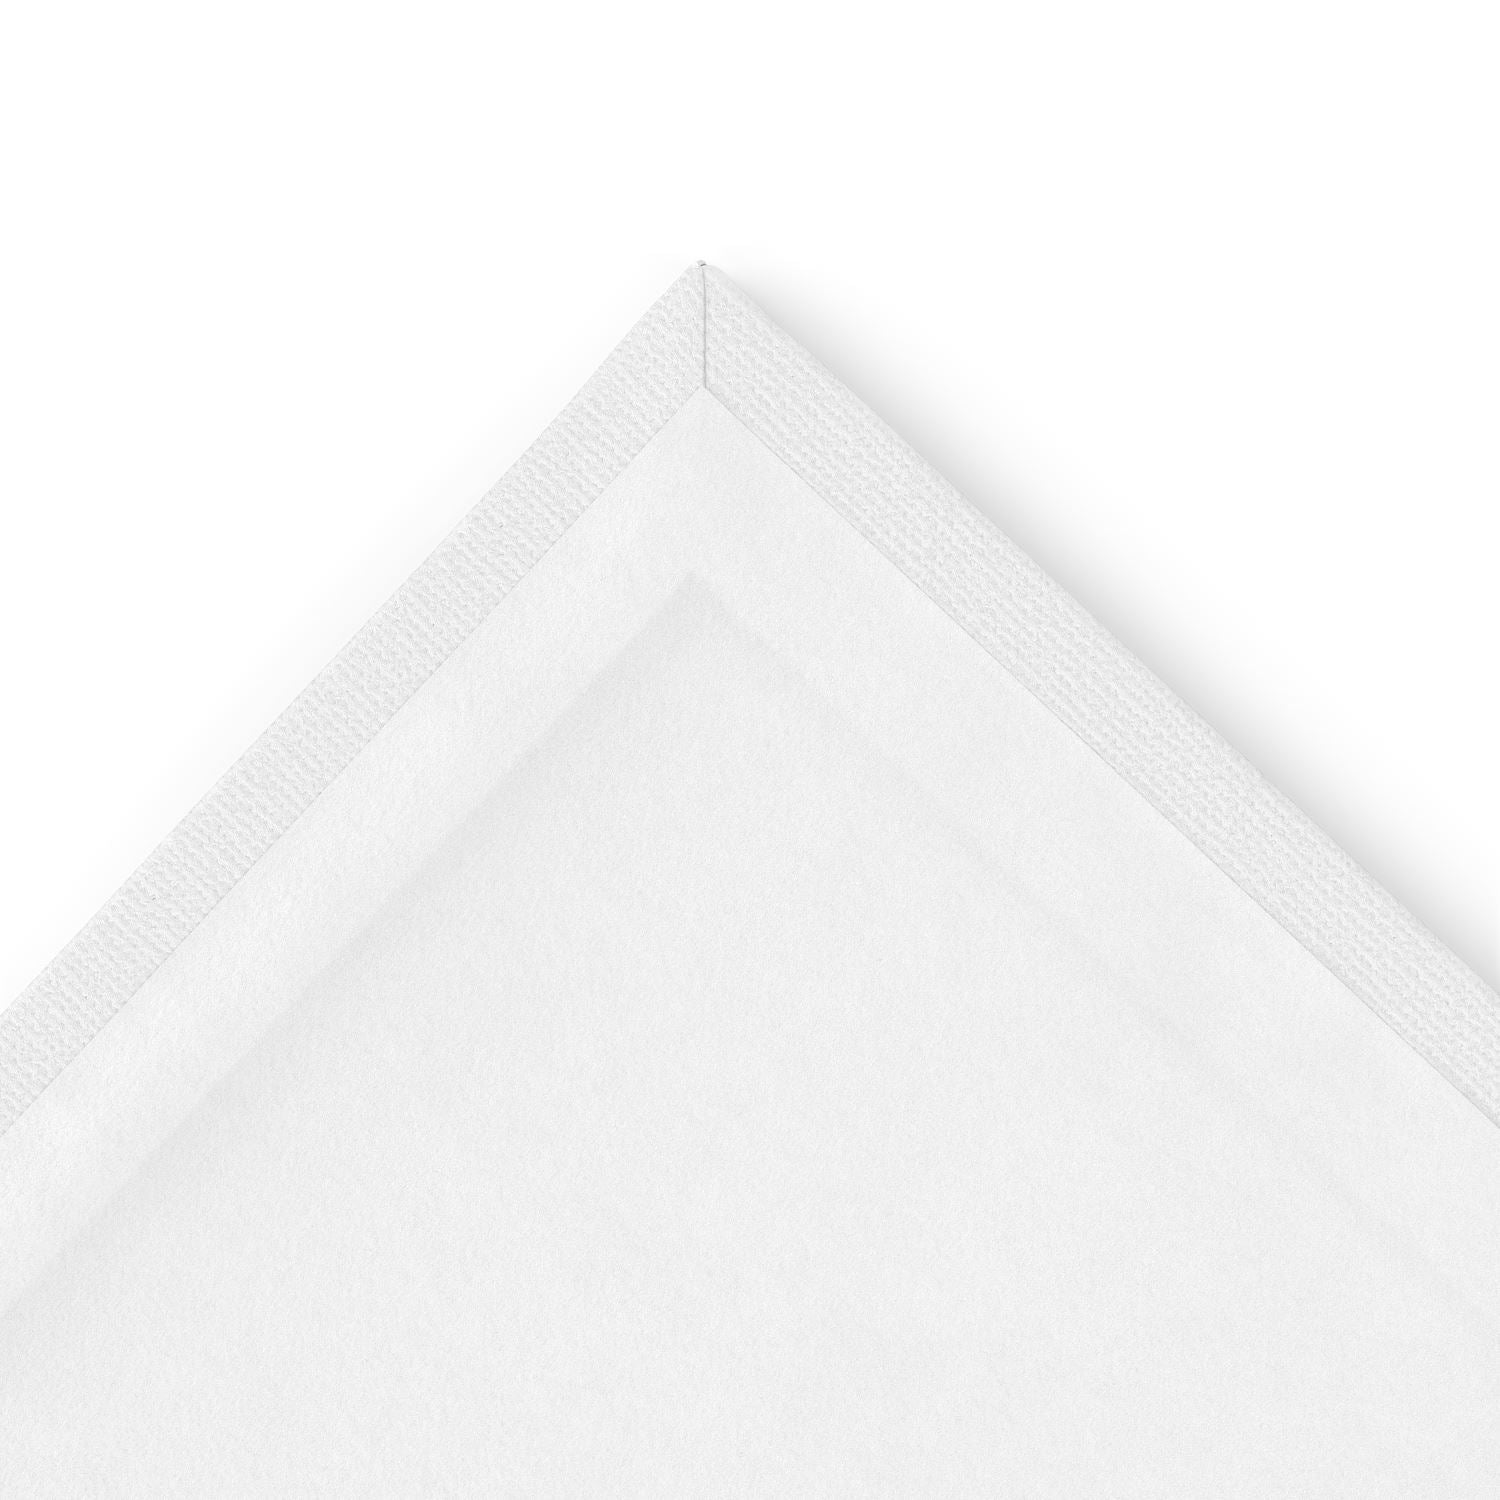 Arteza Canvas Panels 8x8 Inch, White Blank Pack of 14, 100% Cotton, 12.3 oz  Primed, 7 oz Unprimed, Acid-Free, for Acrylic & Oil Painting, Professional